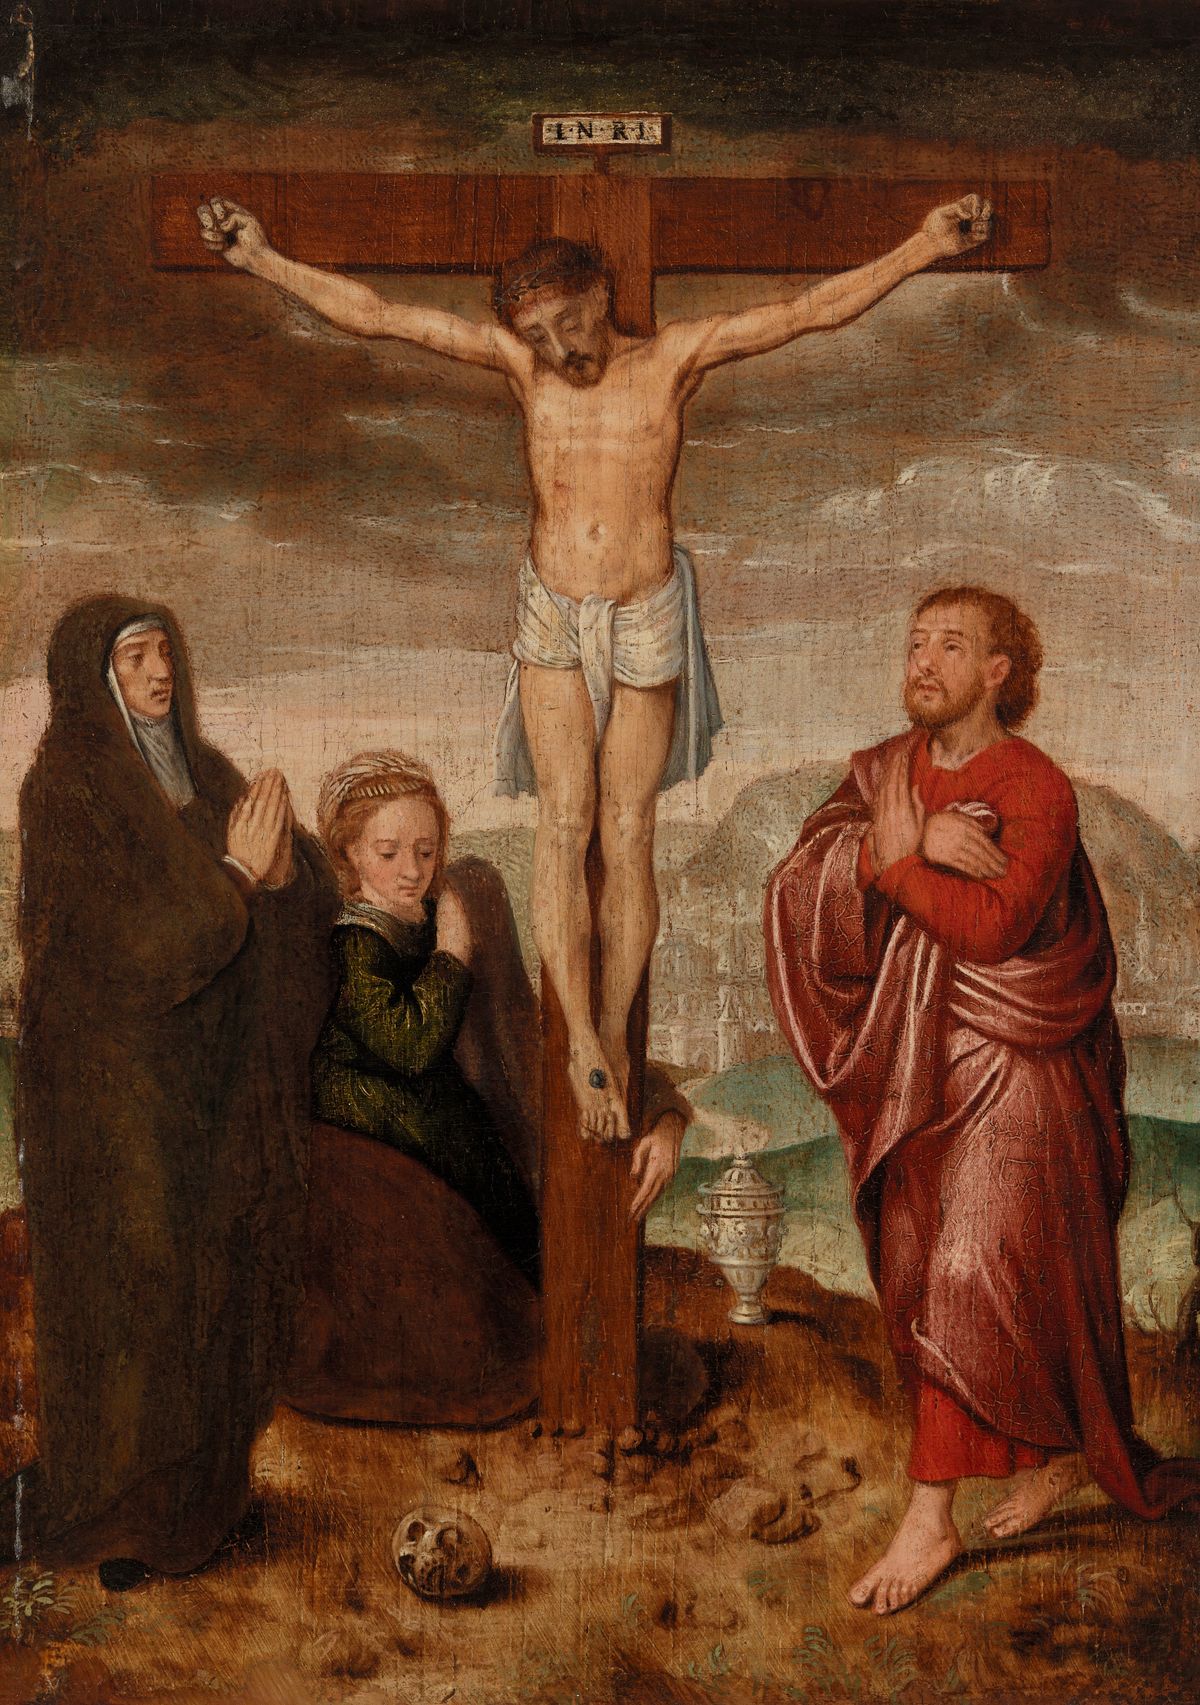 Crucifixion (Mid-16th Century, Netherlands) by Marcellus Coffermans - Public Domain Catholic Painting